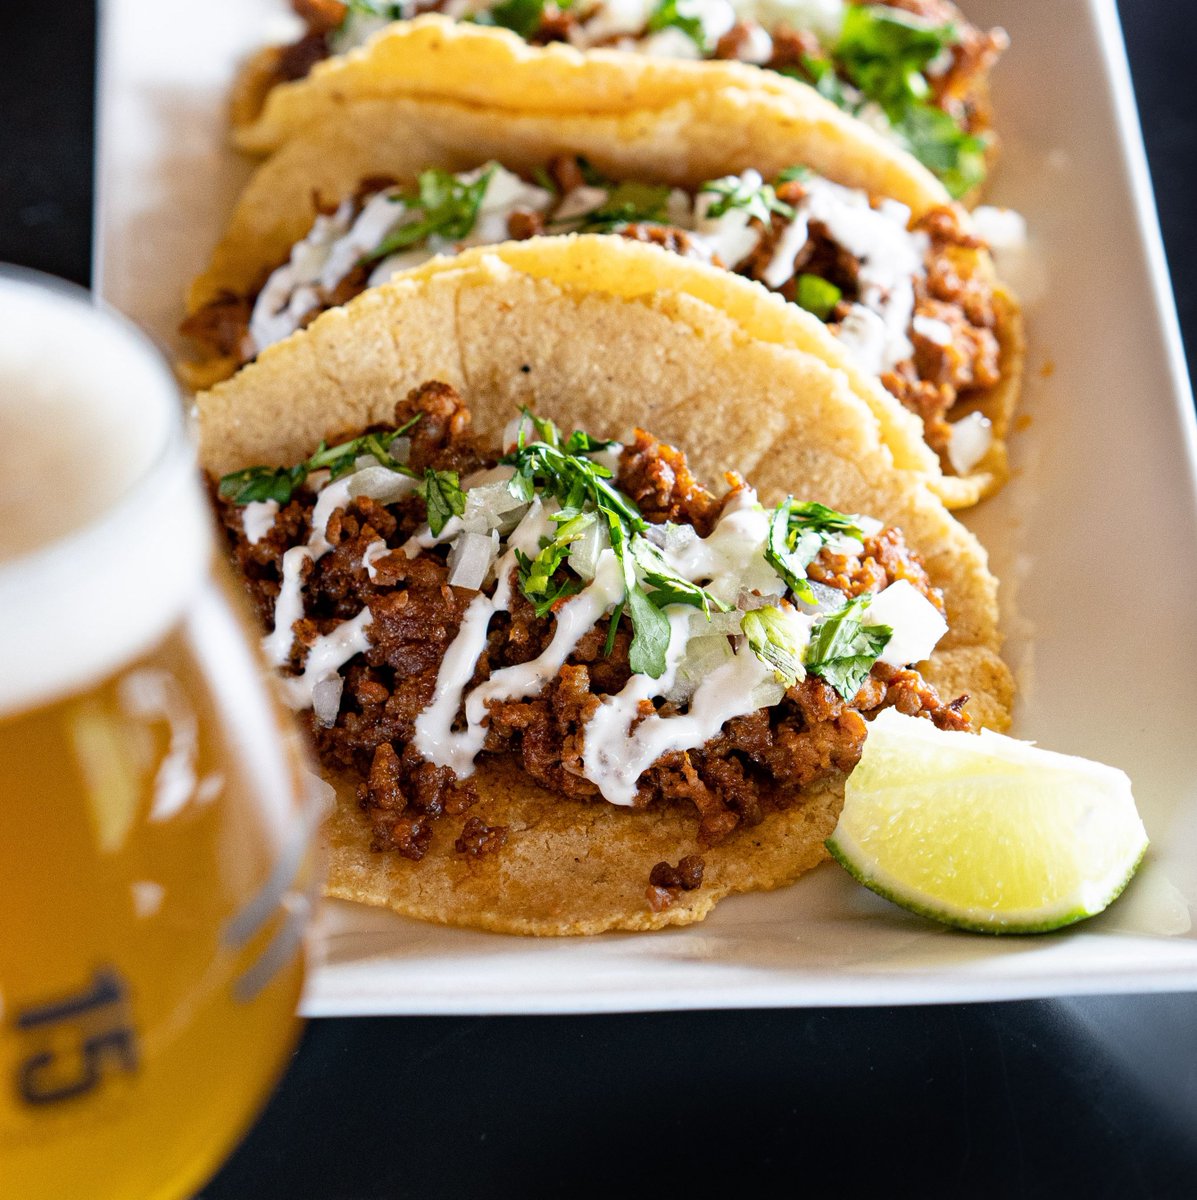 Taco Tuesdays at the Tap Room have started! If you like what you see... Stop by the Tap Room today! #Block15eats #CorvallisOregon #Block15beer #Block15brewing #Corvalliseats #block15food #EatLocal #eatlocalcorvallis